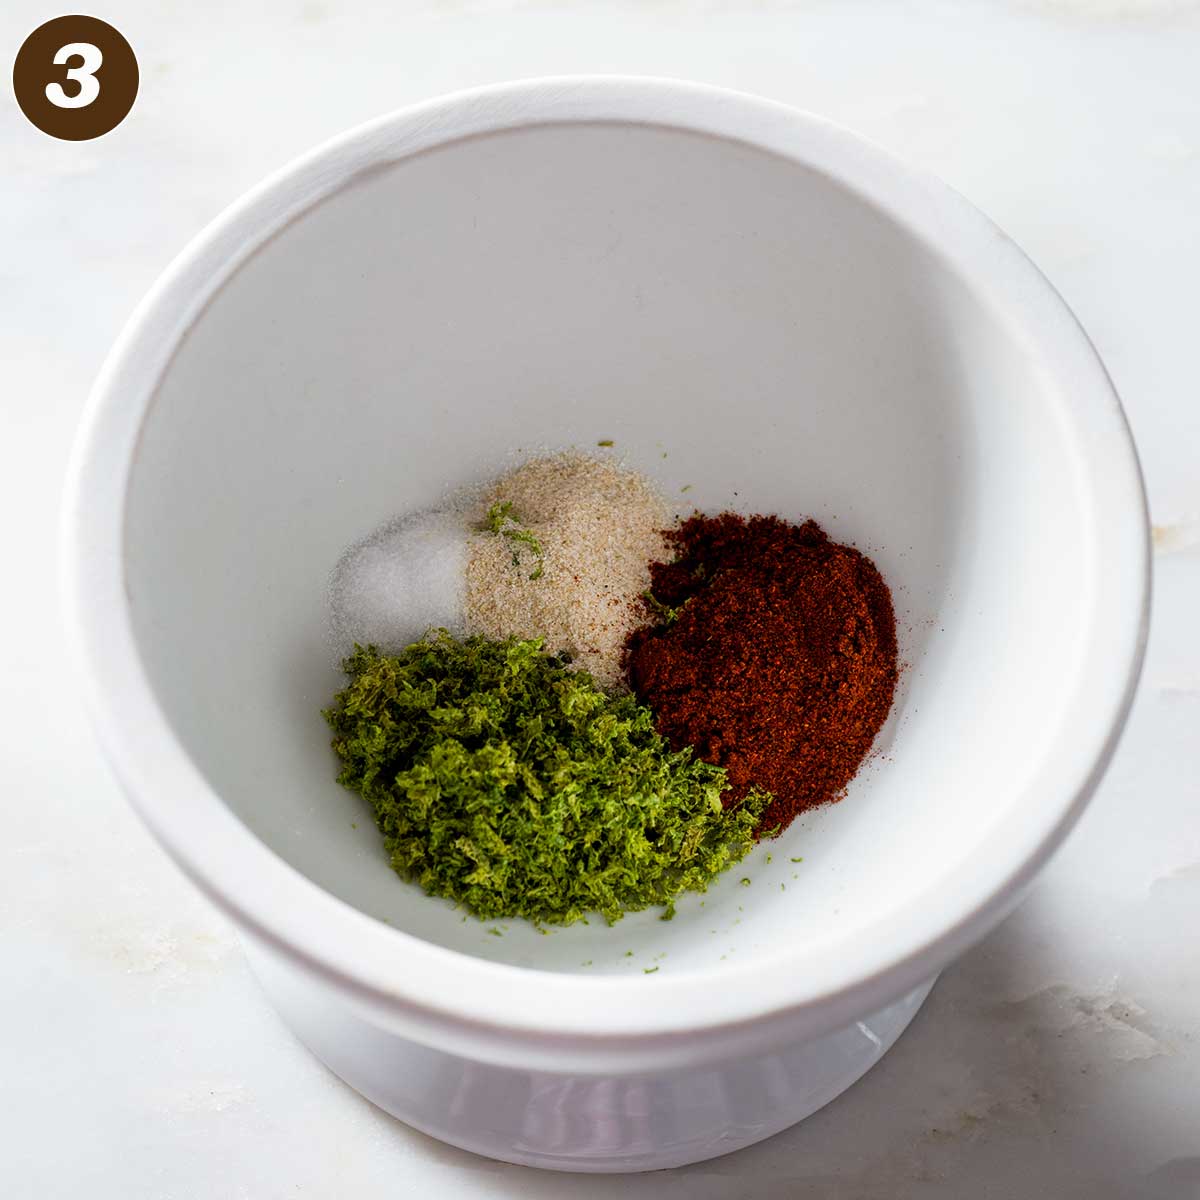 Chipotle lime seasoning ingredients in a mortar.